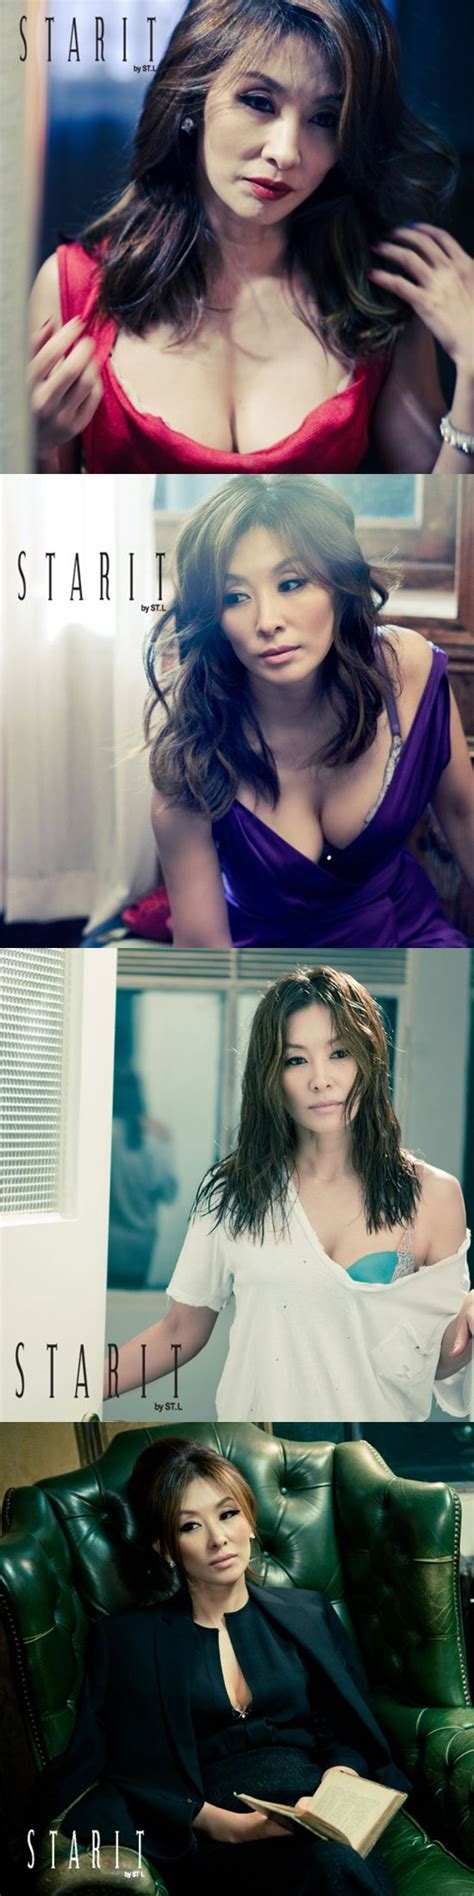 lee mi sook launches lingerie brand at age 50 hancinema the korean movie and drama database